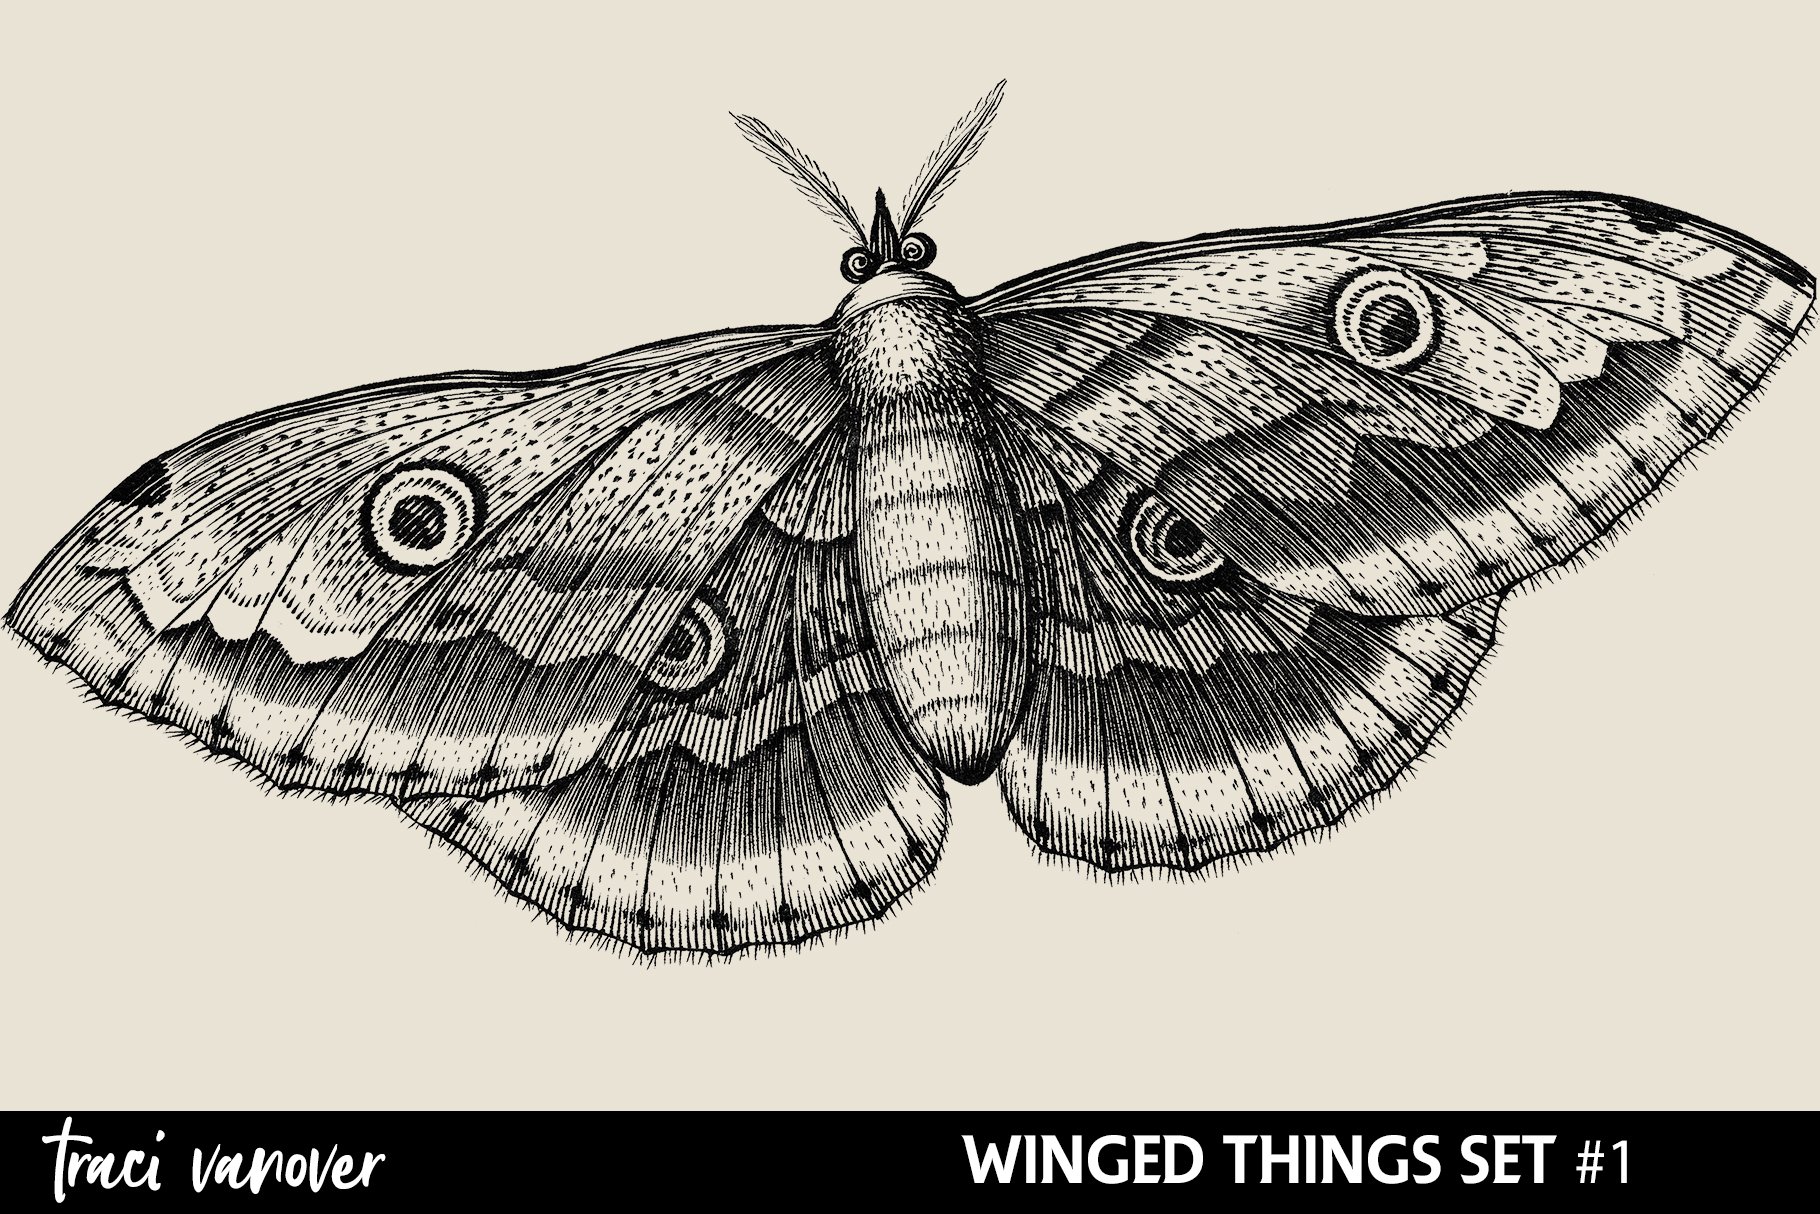 Vintage Winged Things Brushes & PNGspreview image.